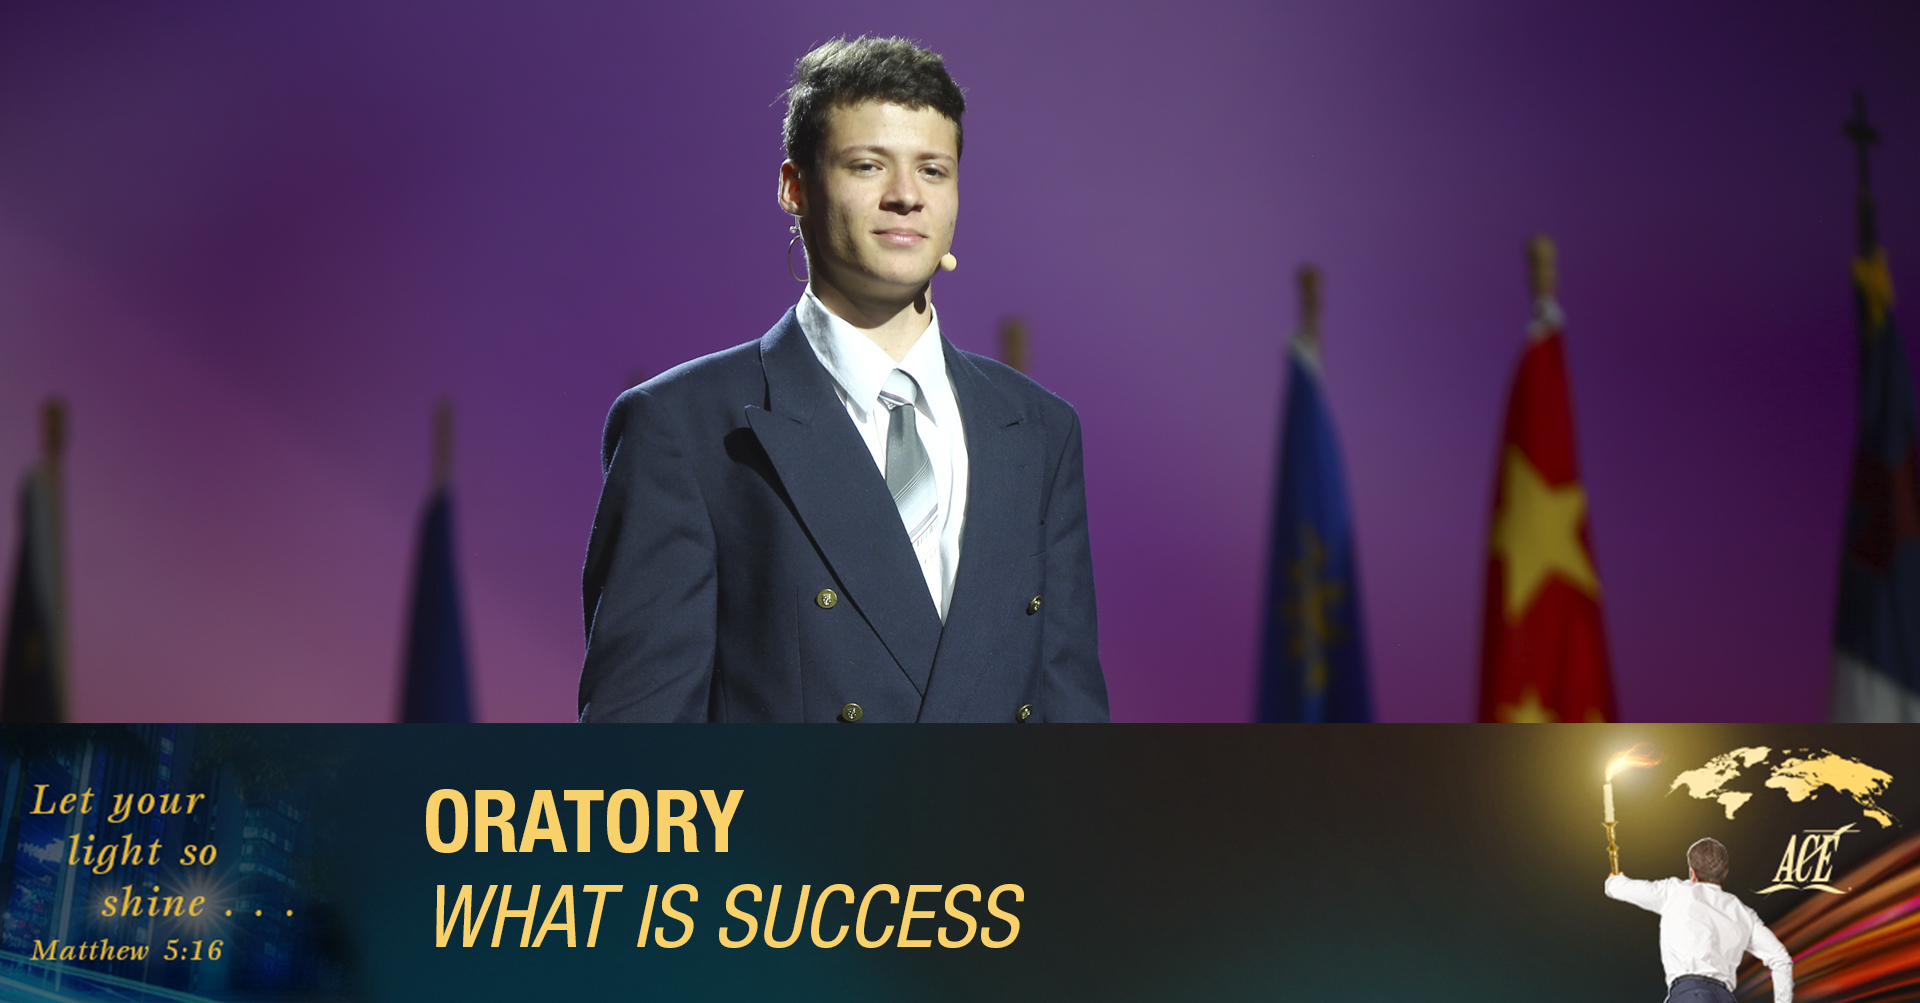 Oratory, "What is Success" - ISC 2019